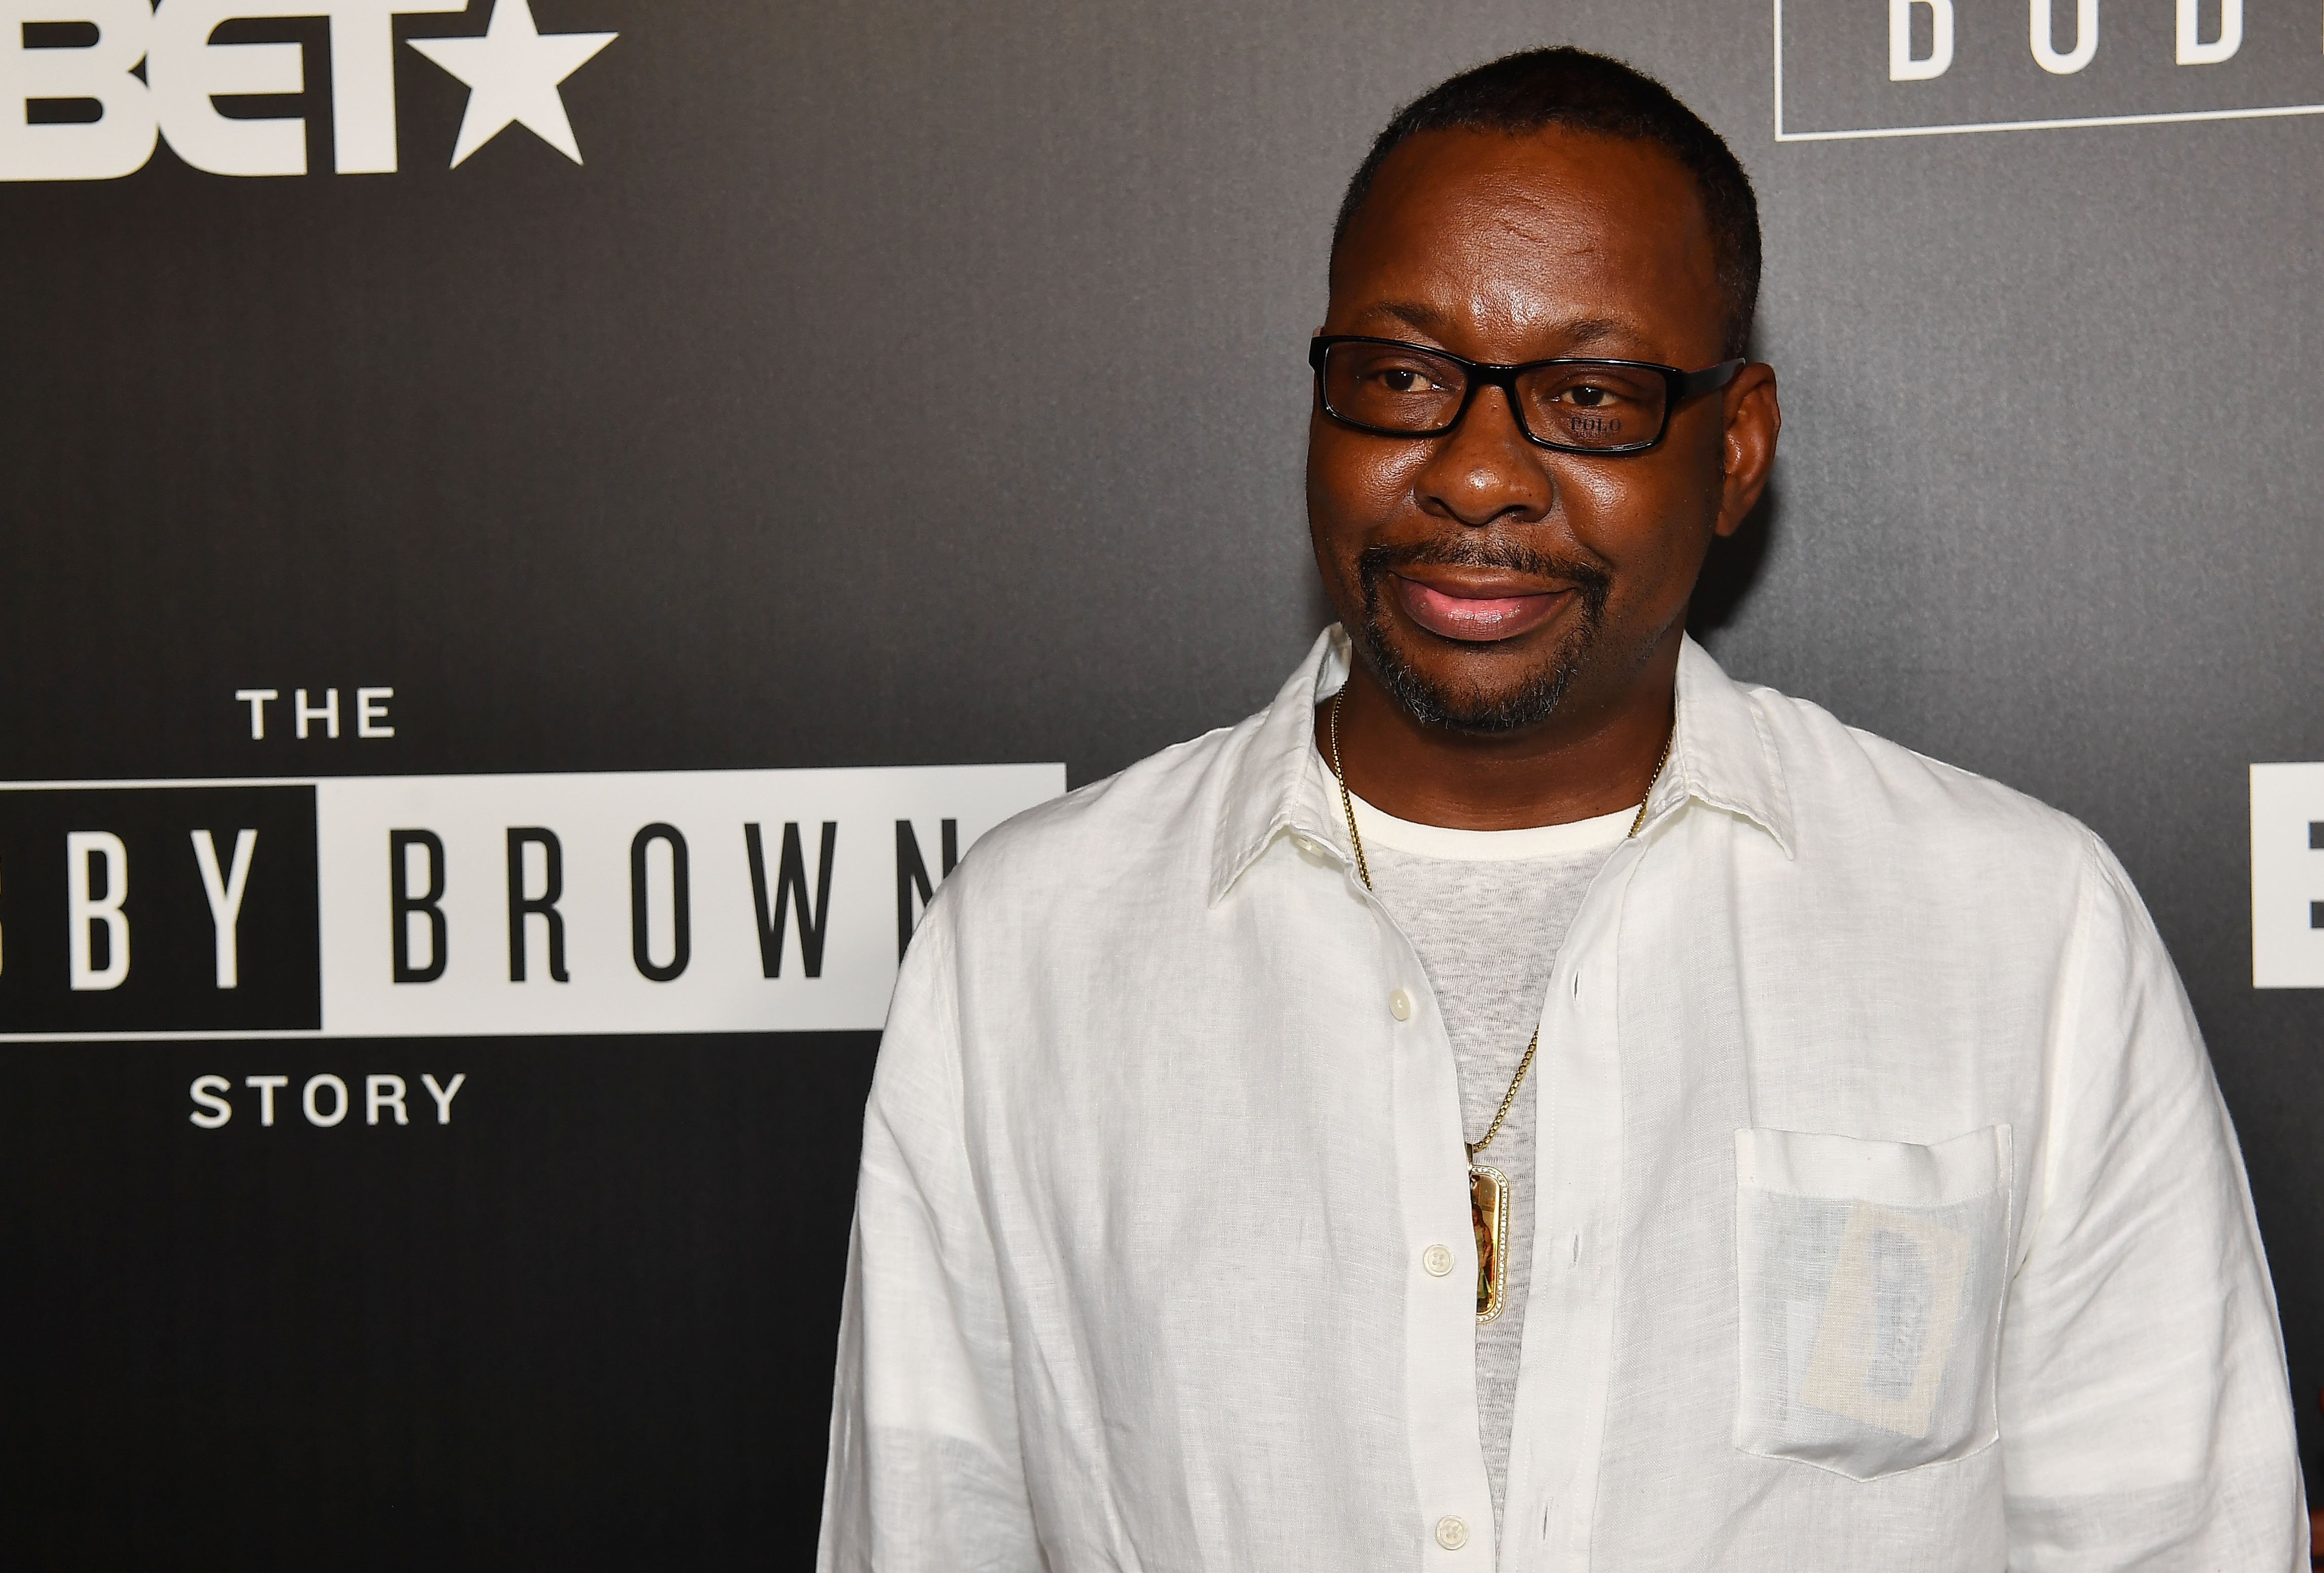 Bobby Brown at the "Bobby-Q" premiere of "The Bobby Brown Story" on September 1, 2018 in Atlanta. | Source: Getty Images